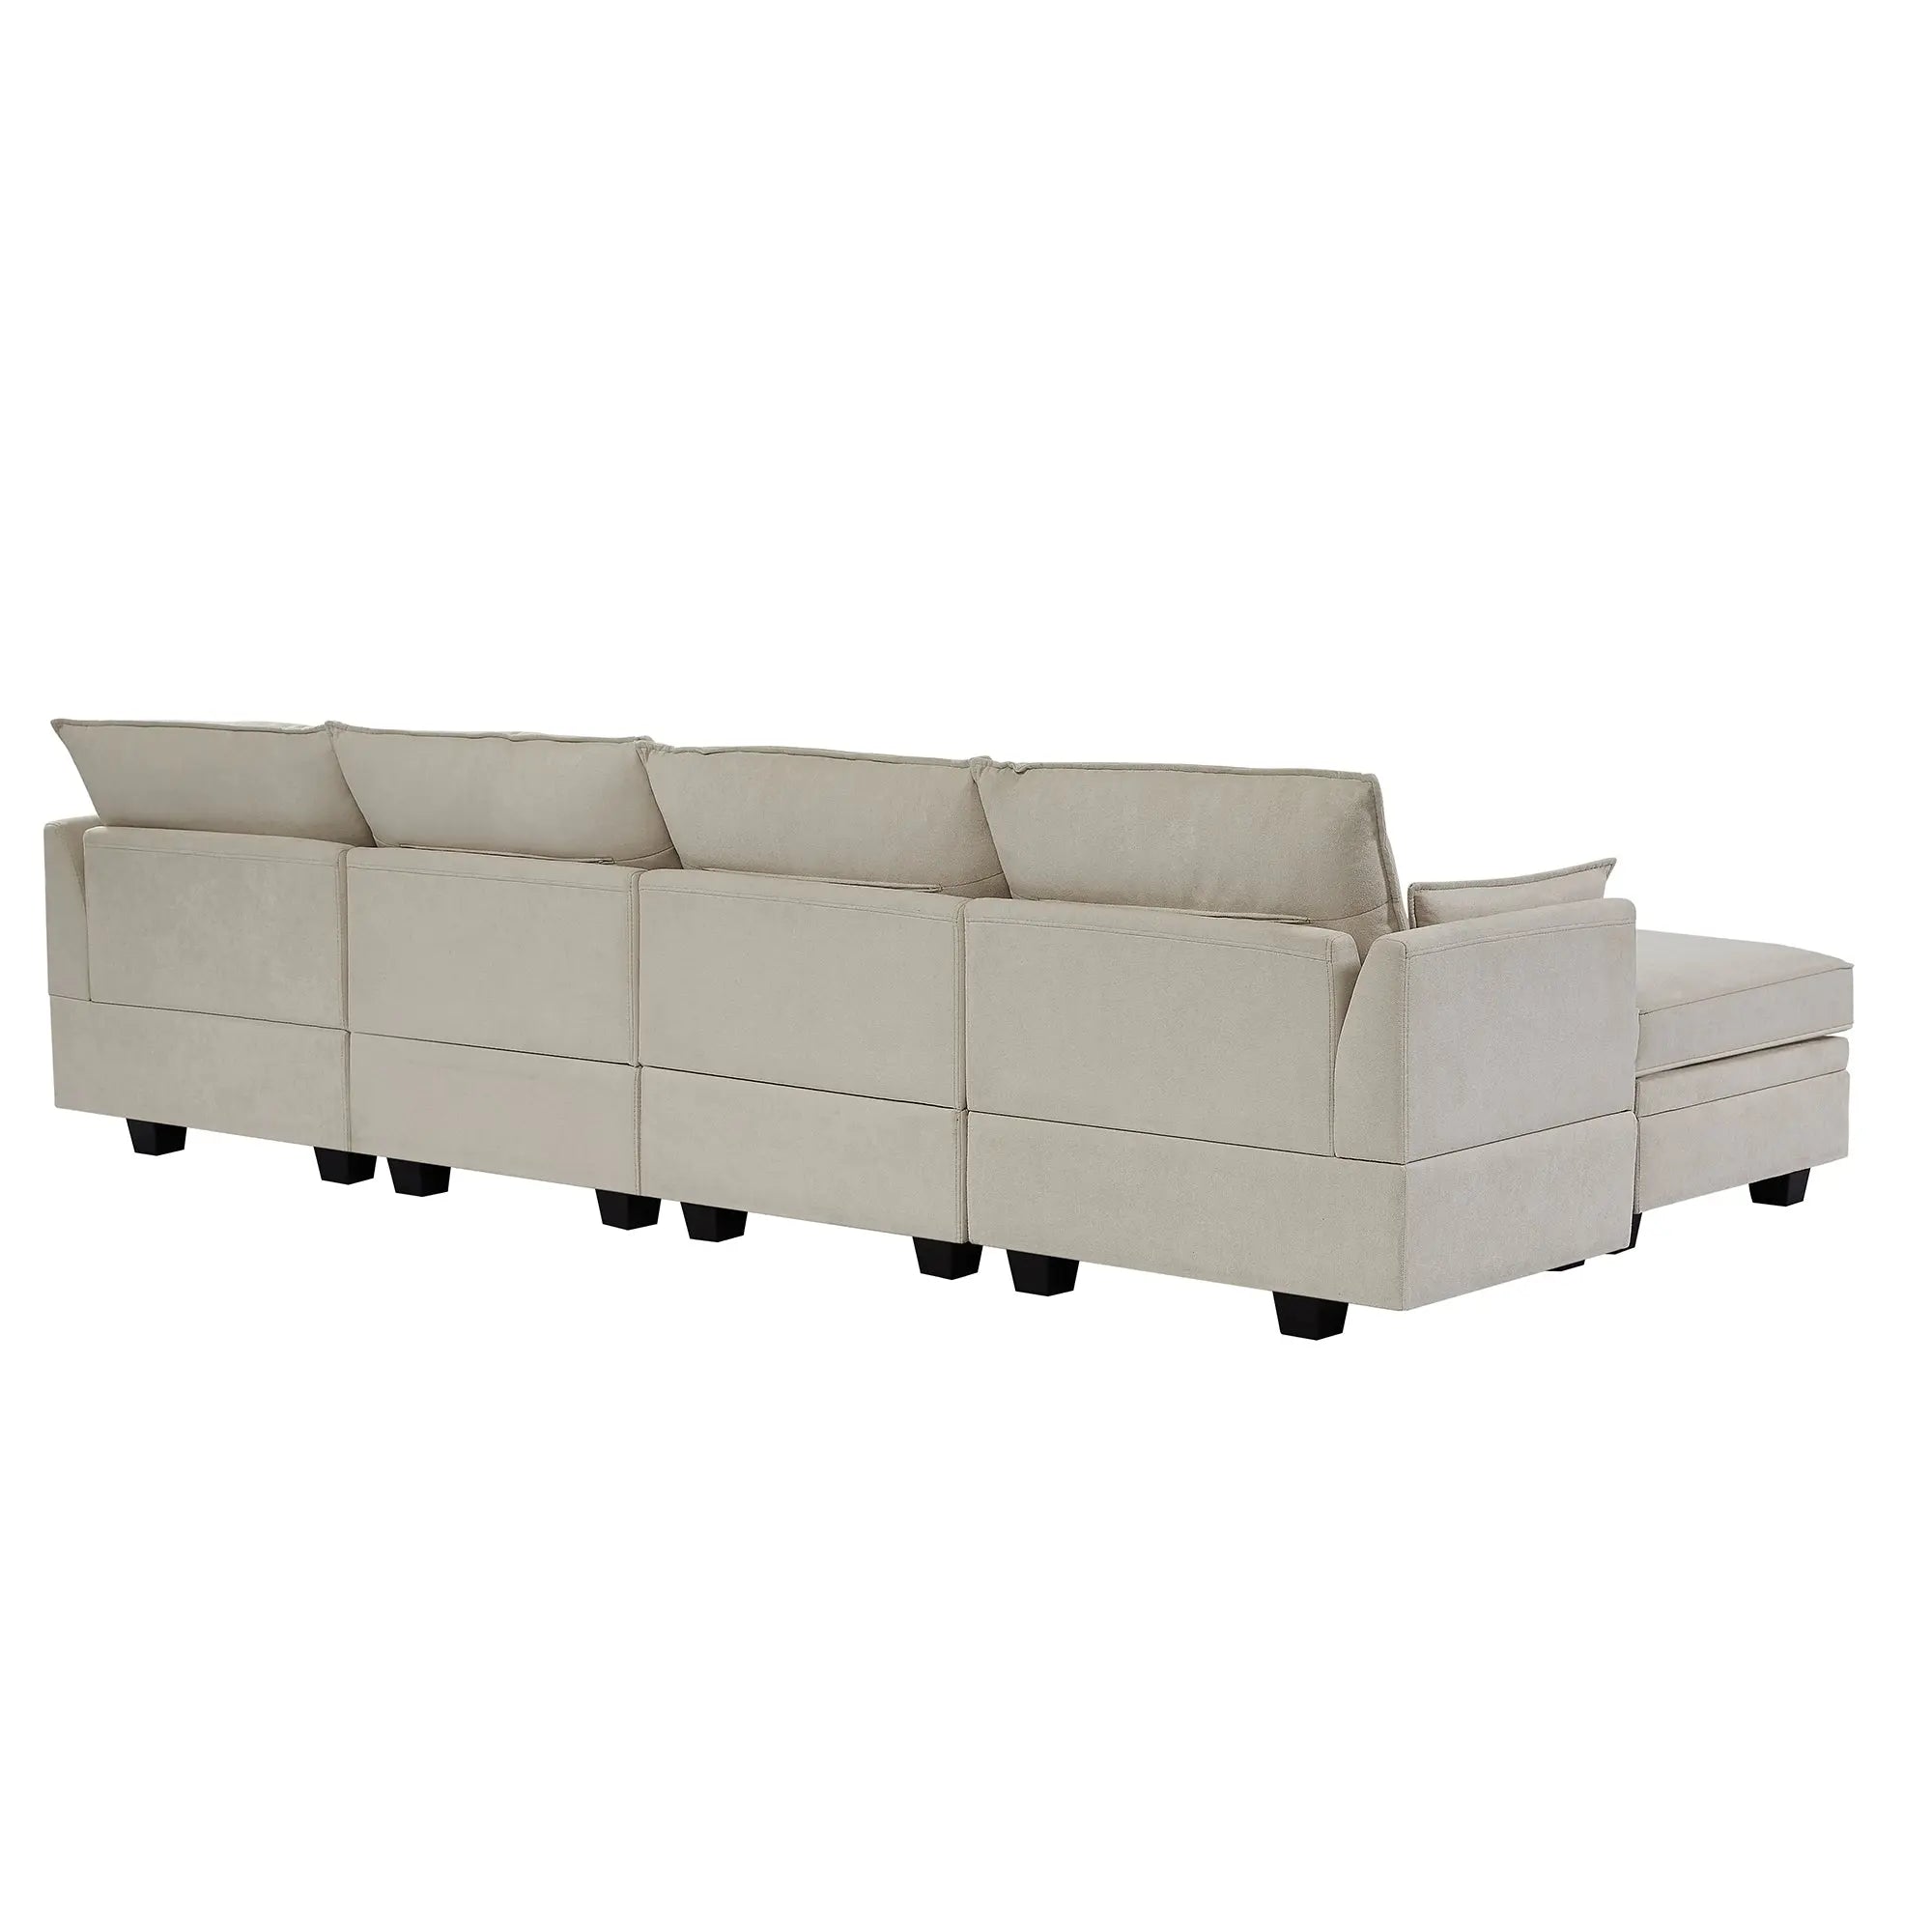 Bellemave 115" Modern Large U-Shape Modular Sectional Sofa, Convertible Sofa Bed with Reversible Chaise Bellemave